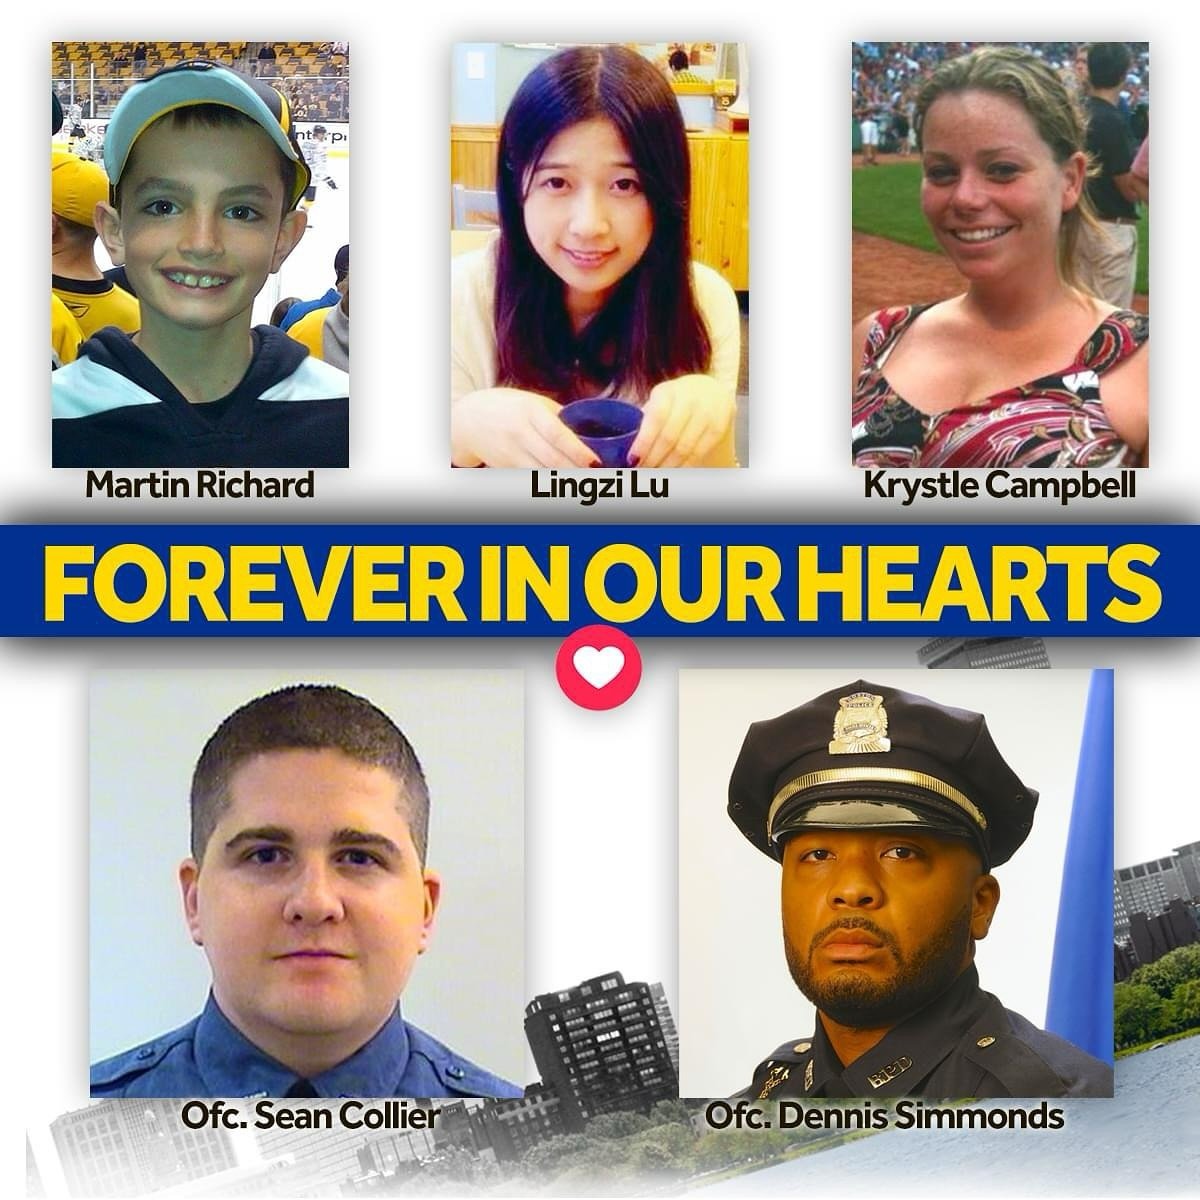 11 years ago the unthinkable happened, but since then, our community has proven resilient beyond measure. We are #BostonStrong. 

We will never forget Martin Richard, Lingzi Lu, Krystle Campbell, Dennis Simmonds, and Sean Collier, who was from Wilmin